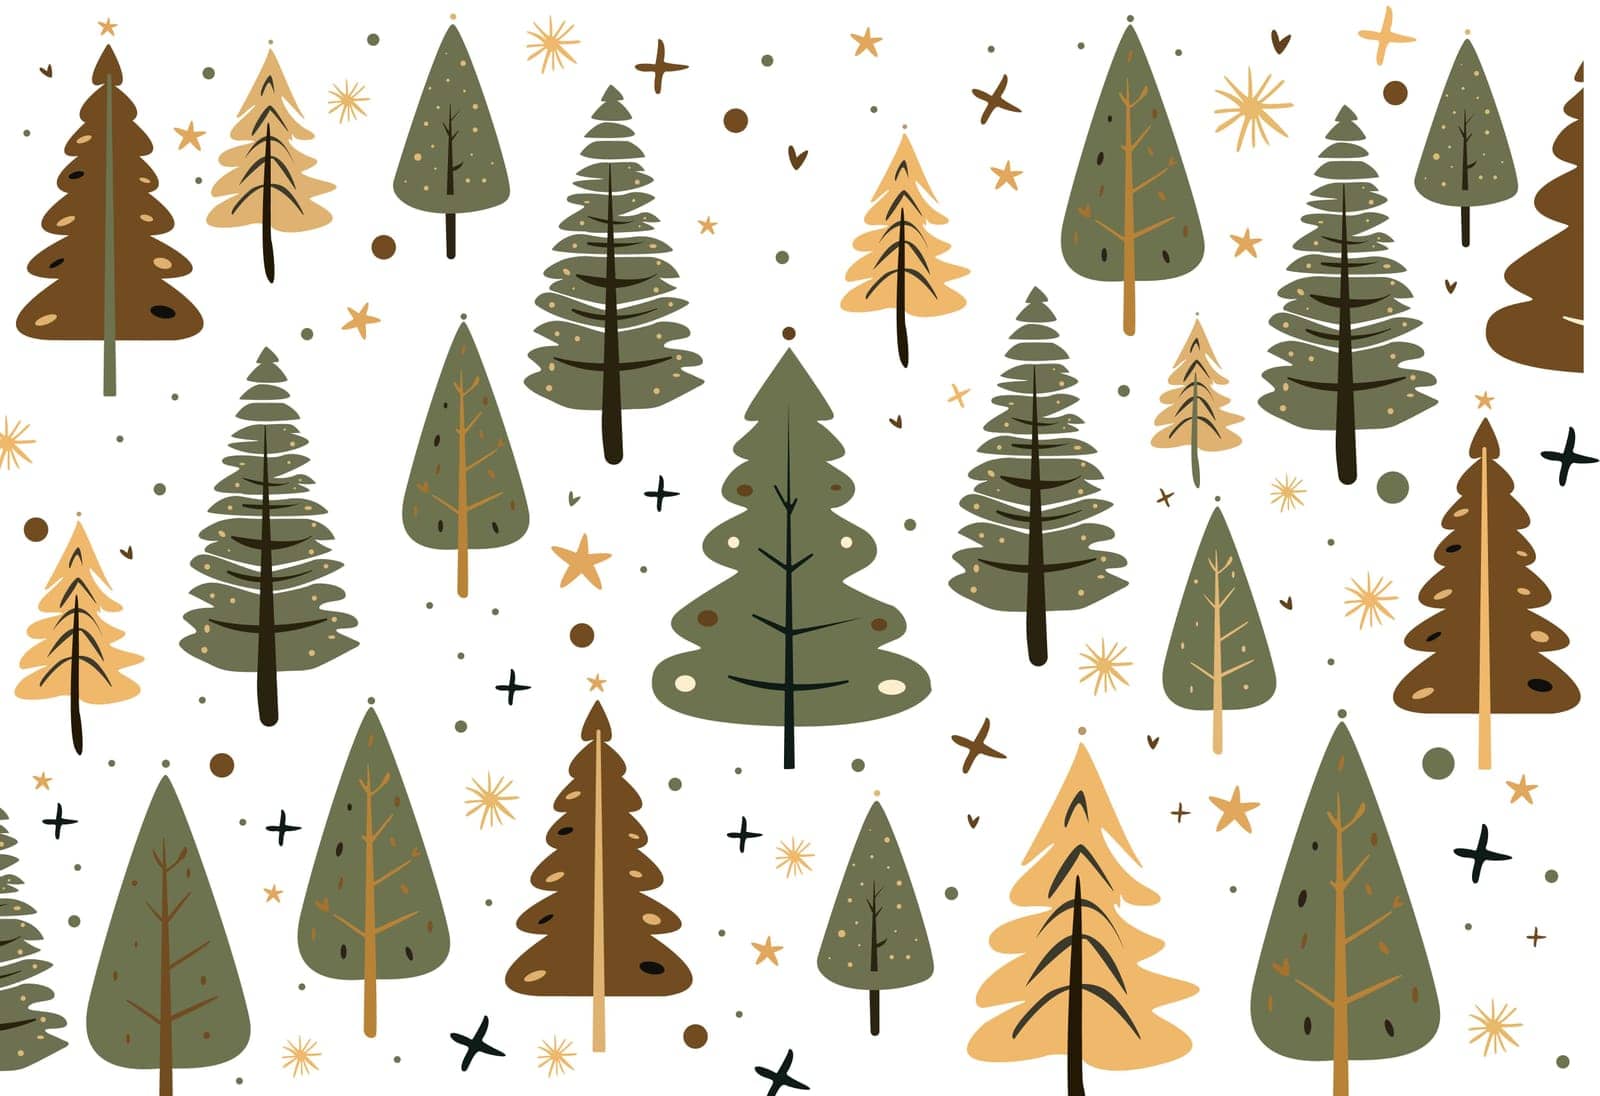 New Year background with the image of various Christmas trees, modern flat design. by Vovmar